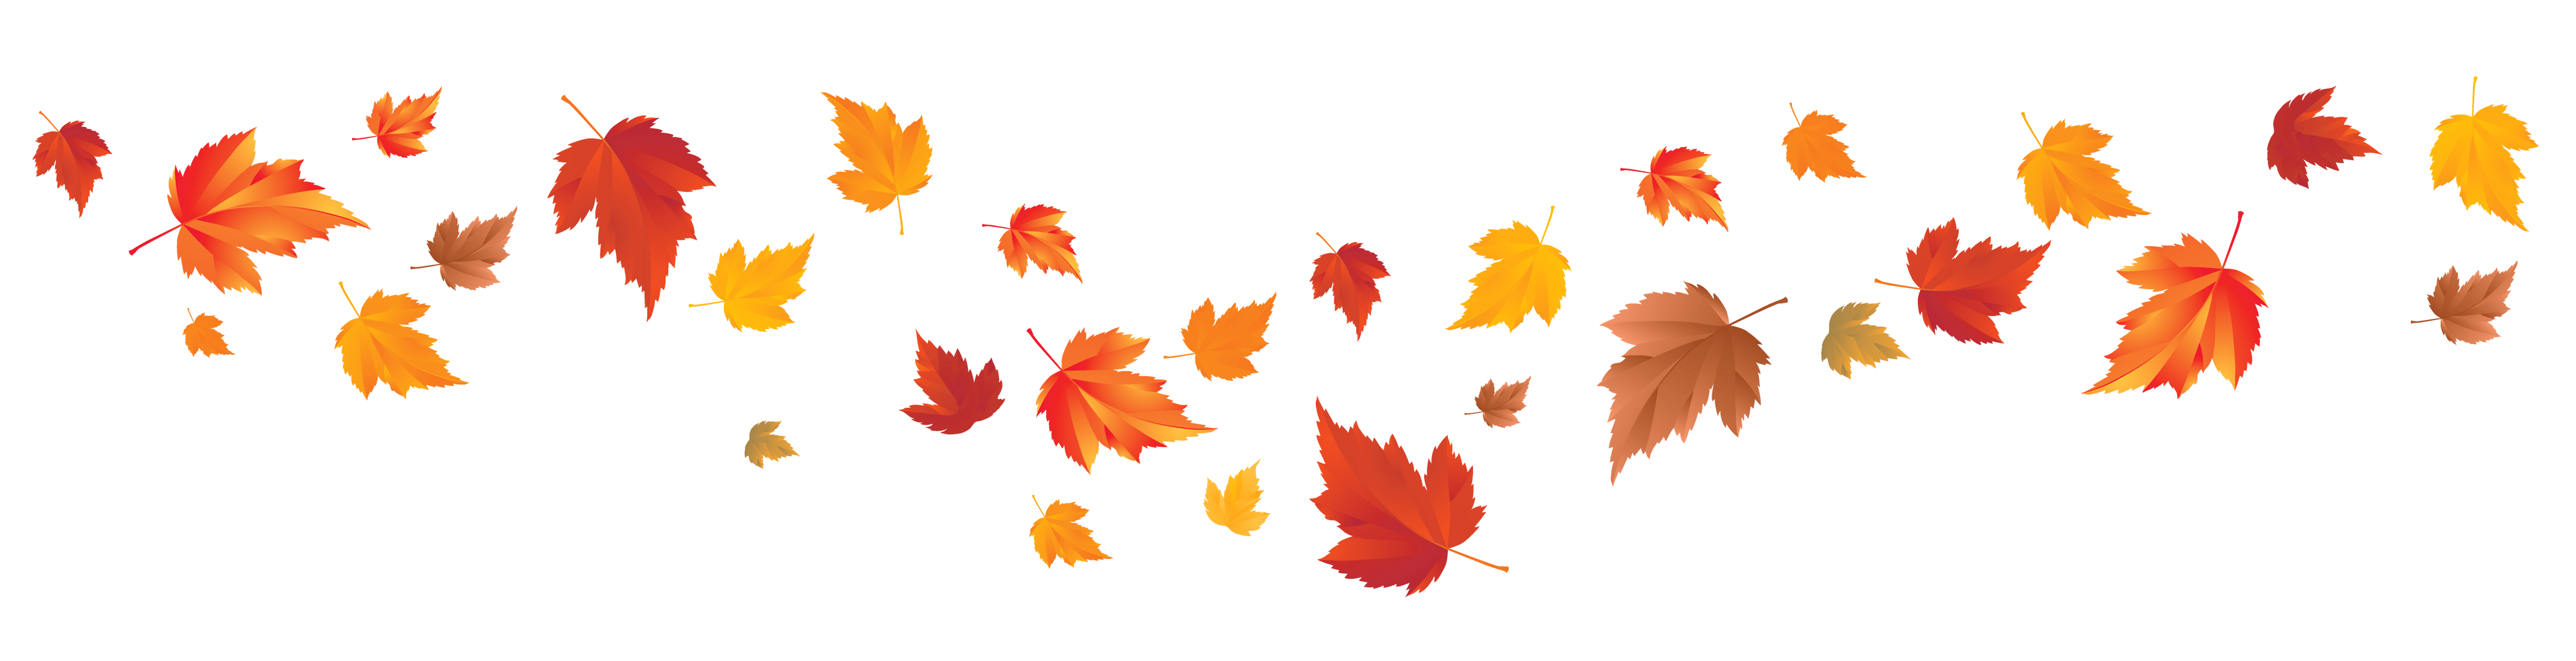 https://gallery.yopriceville.com/var/albums/Free-Clipart-Pictures/Fall-PNG/Fall_Leaves_PNG_Image.png?m=1435287302